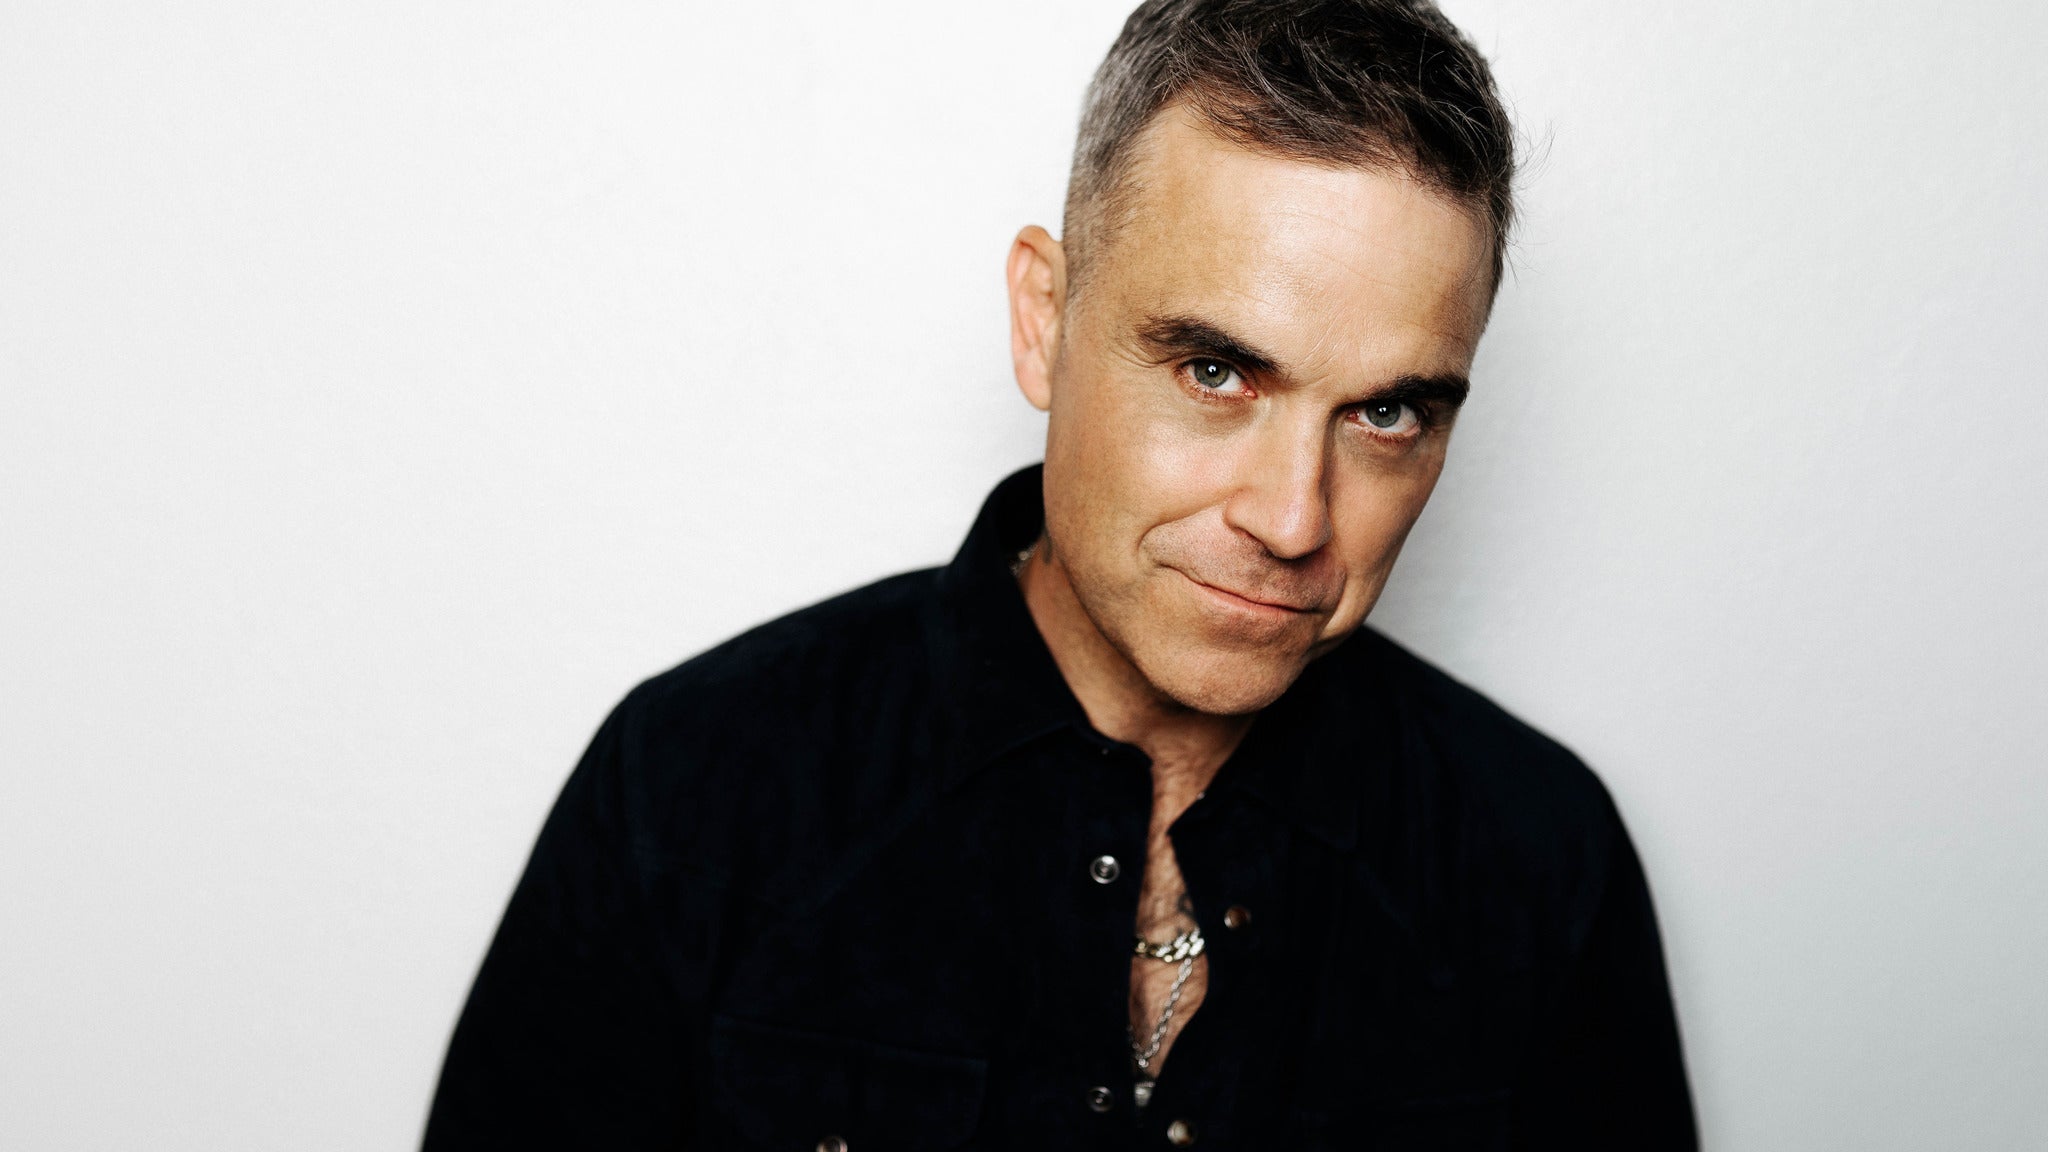 Image used with permission from Ticketmaster | Robbie Williams tickets